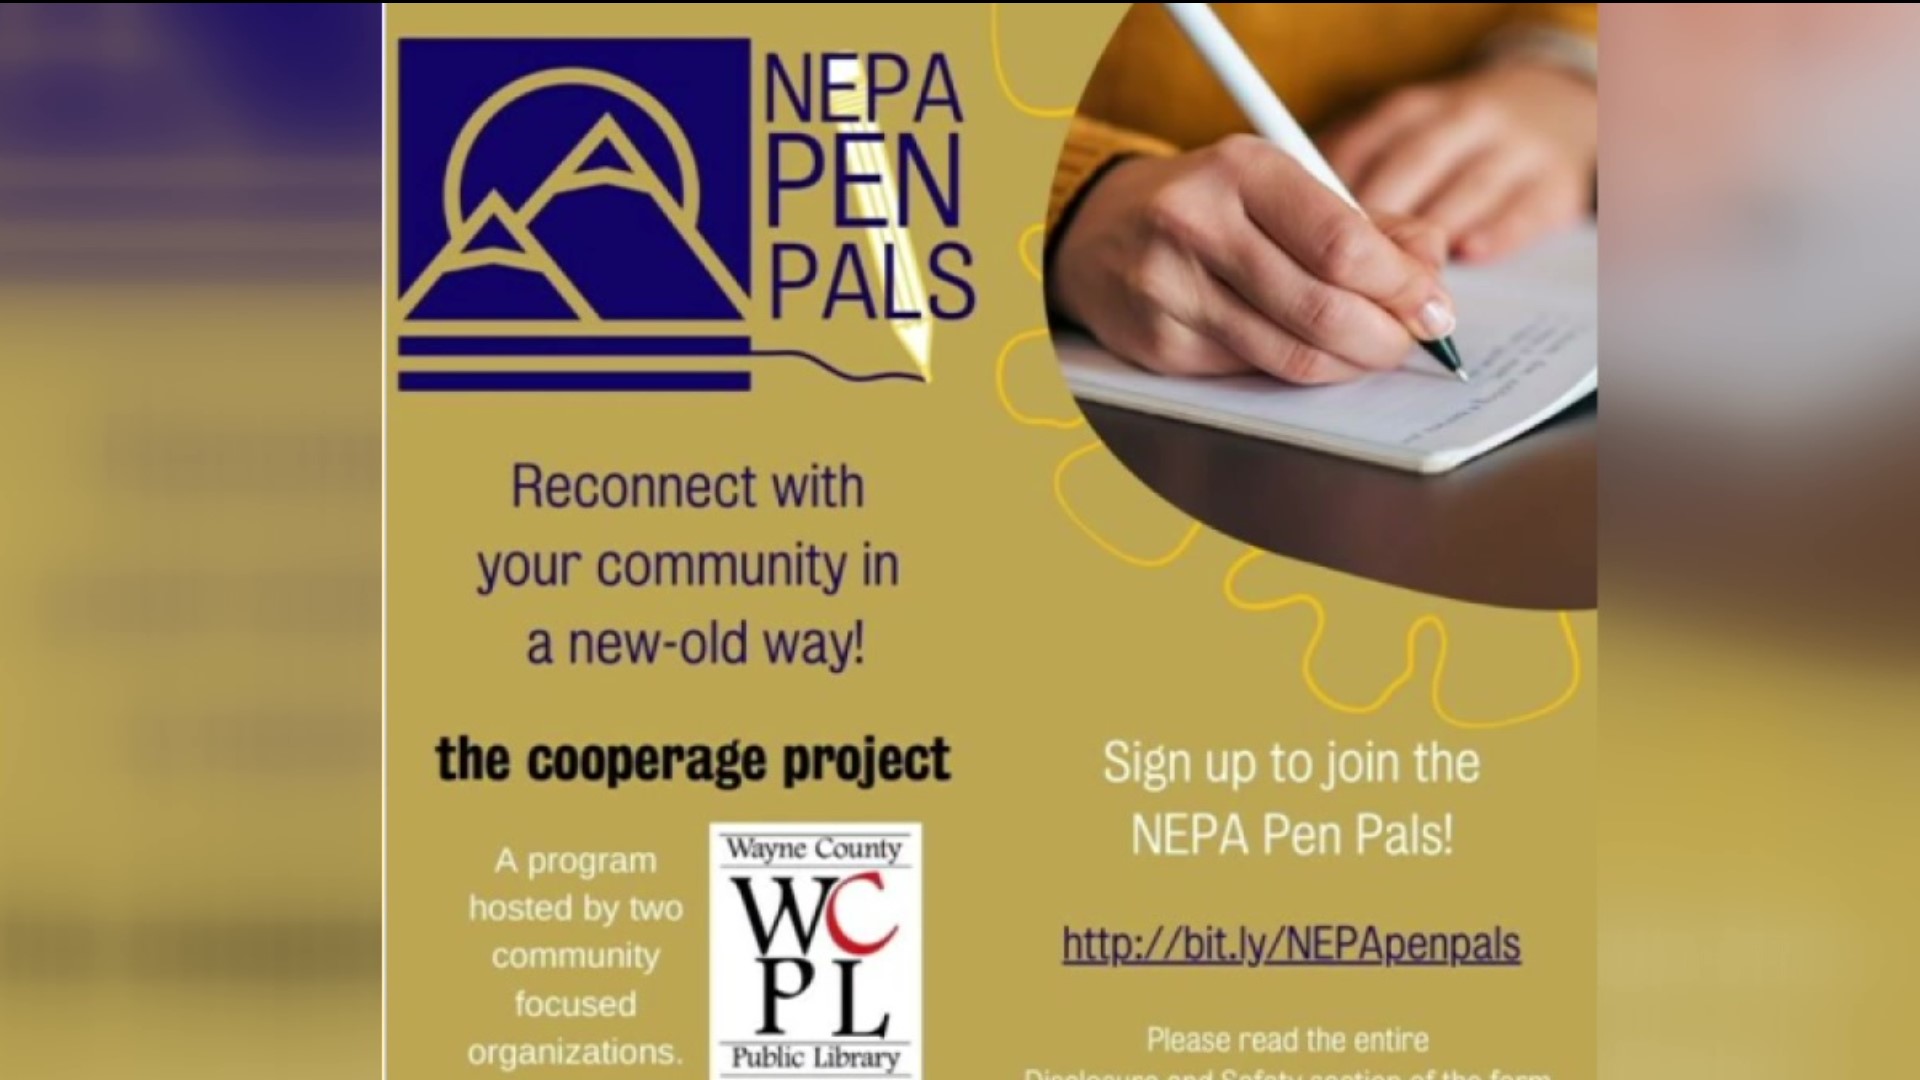 Many people are finding ways to reconnect offline during the pandemic. A program in Wayne County is having folks put pen to paper to do so.